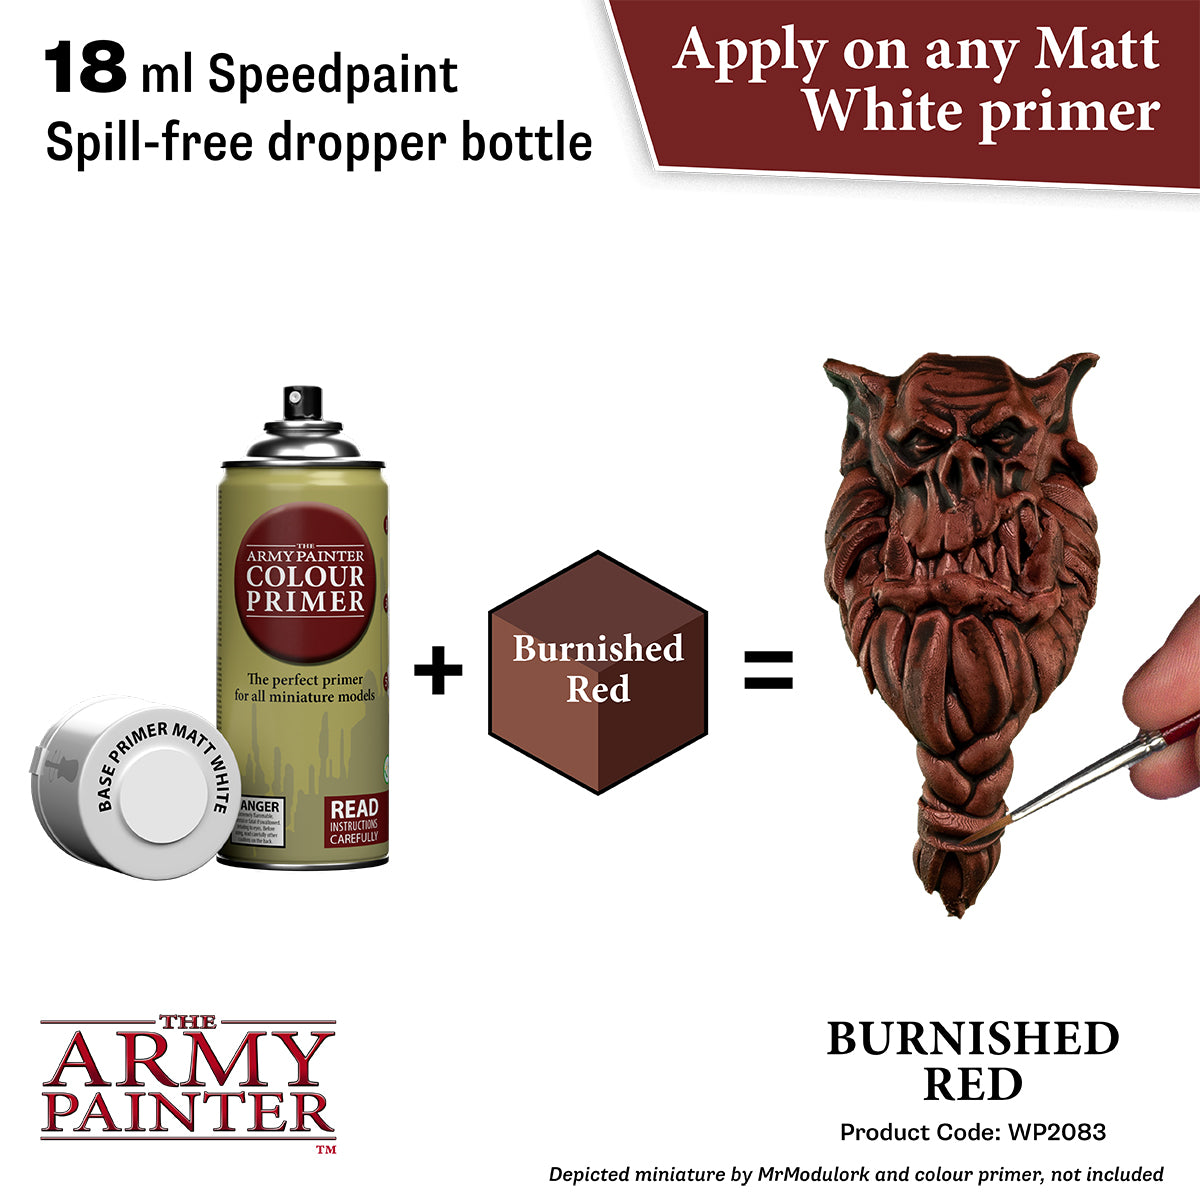 Army Painter Speedpaint 2.0 - Burnished Red 18ml